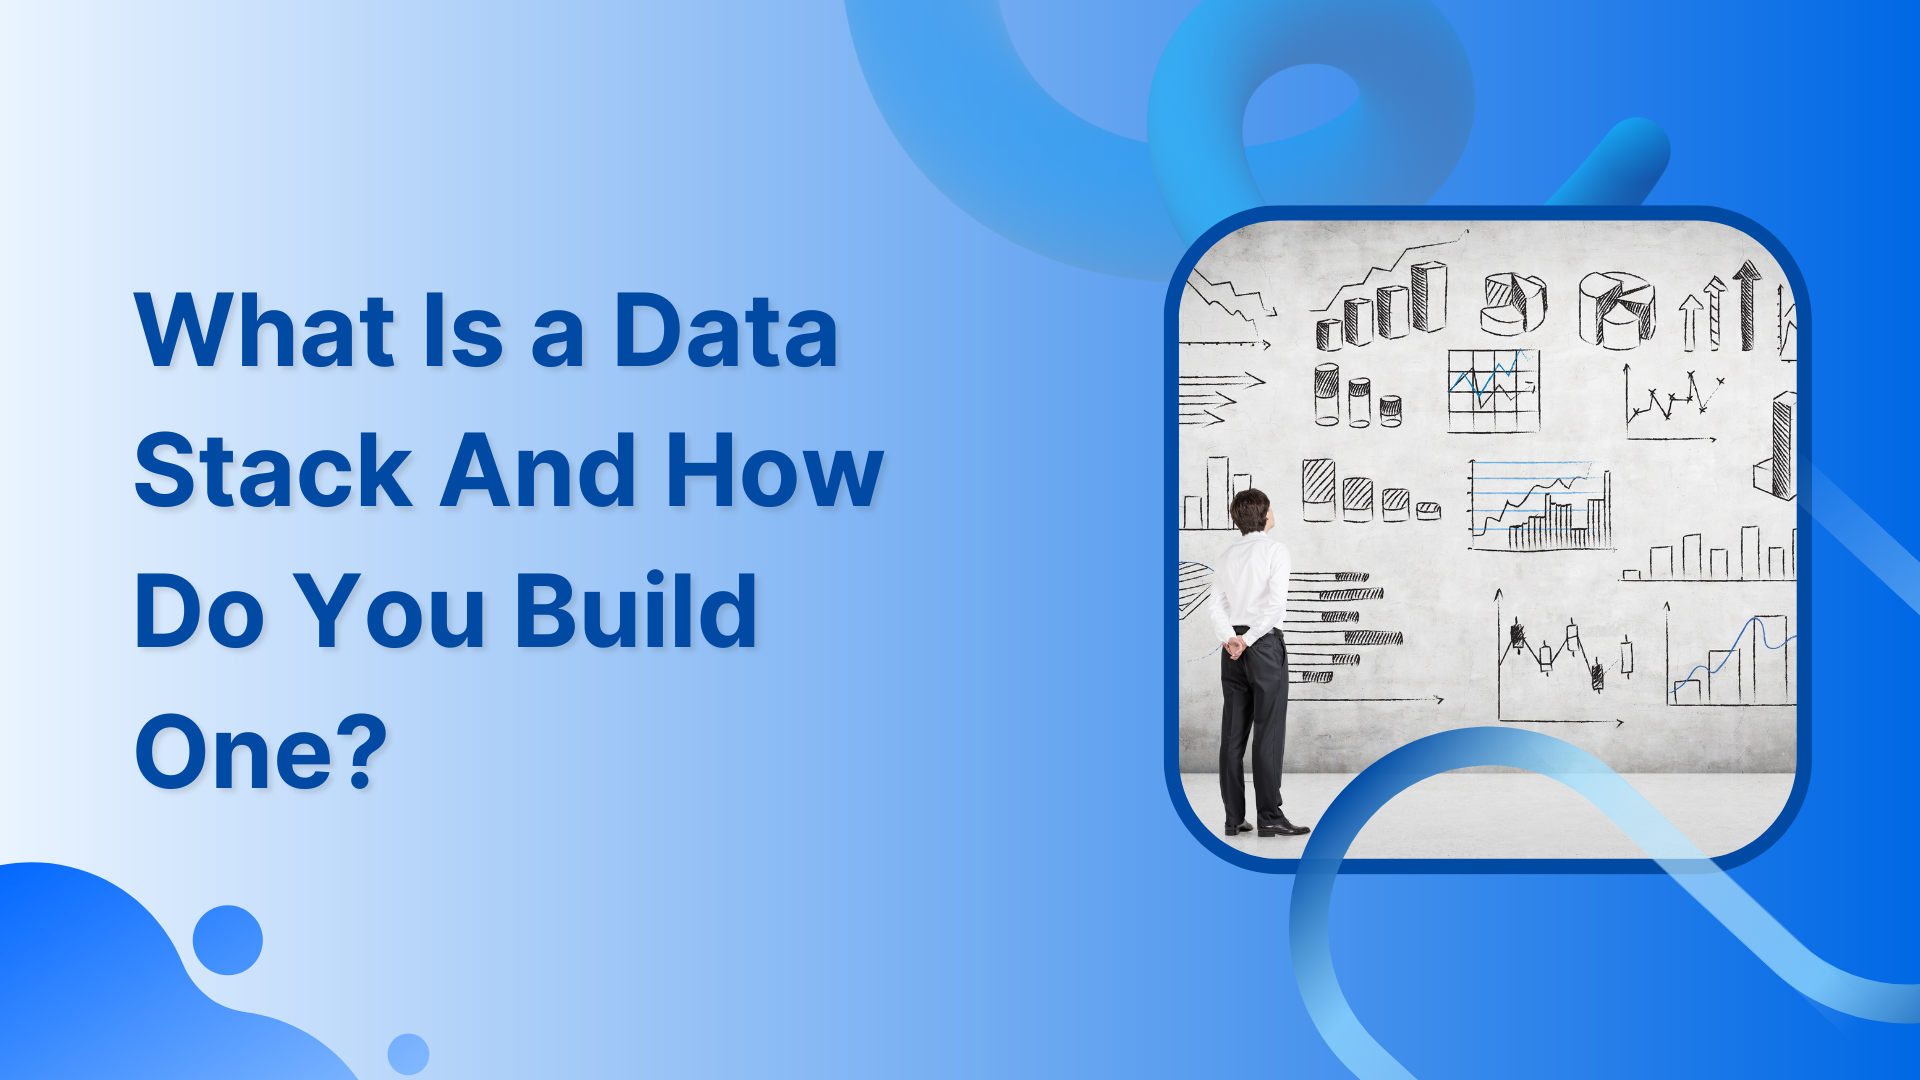 What Is a Data Stack And How Do You Build One?